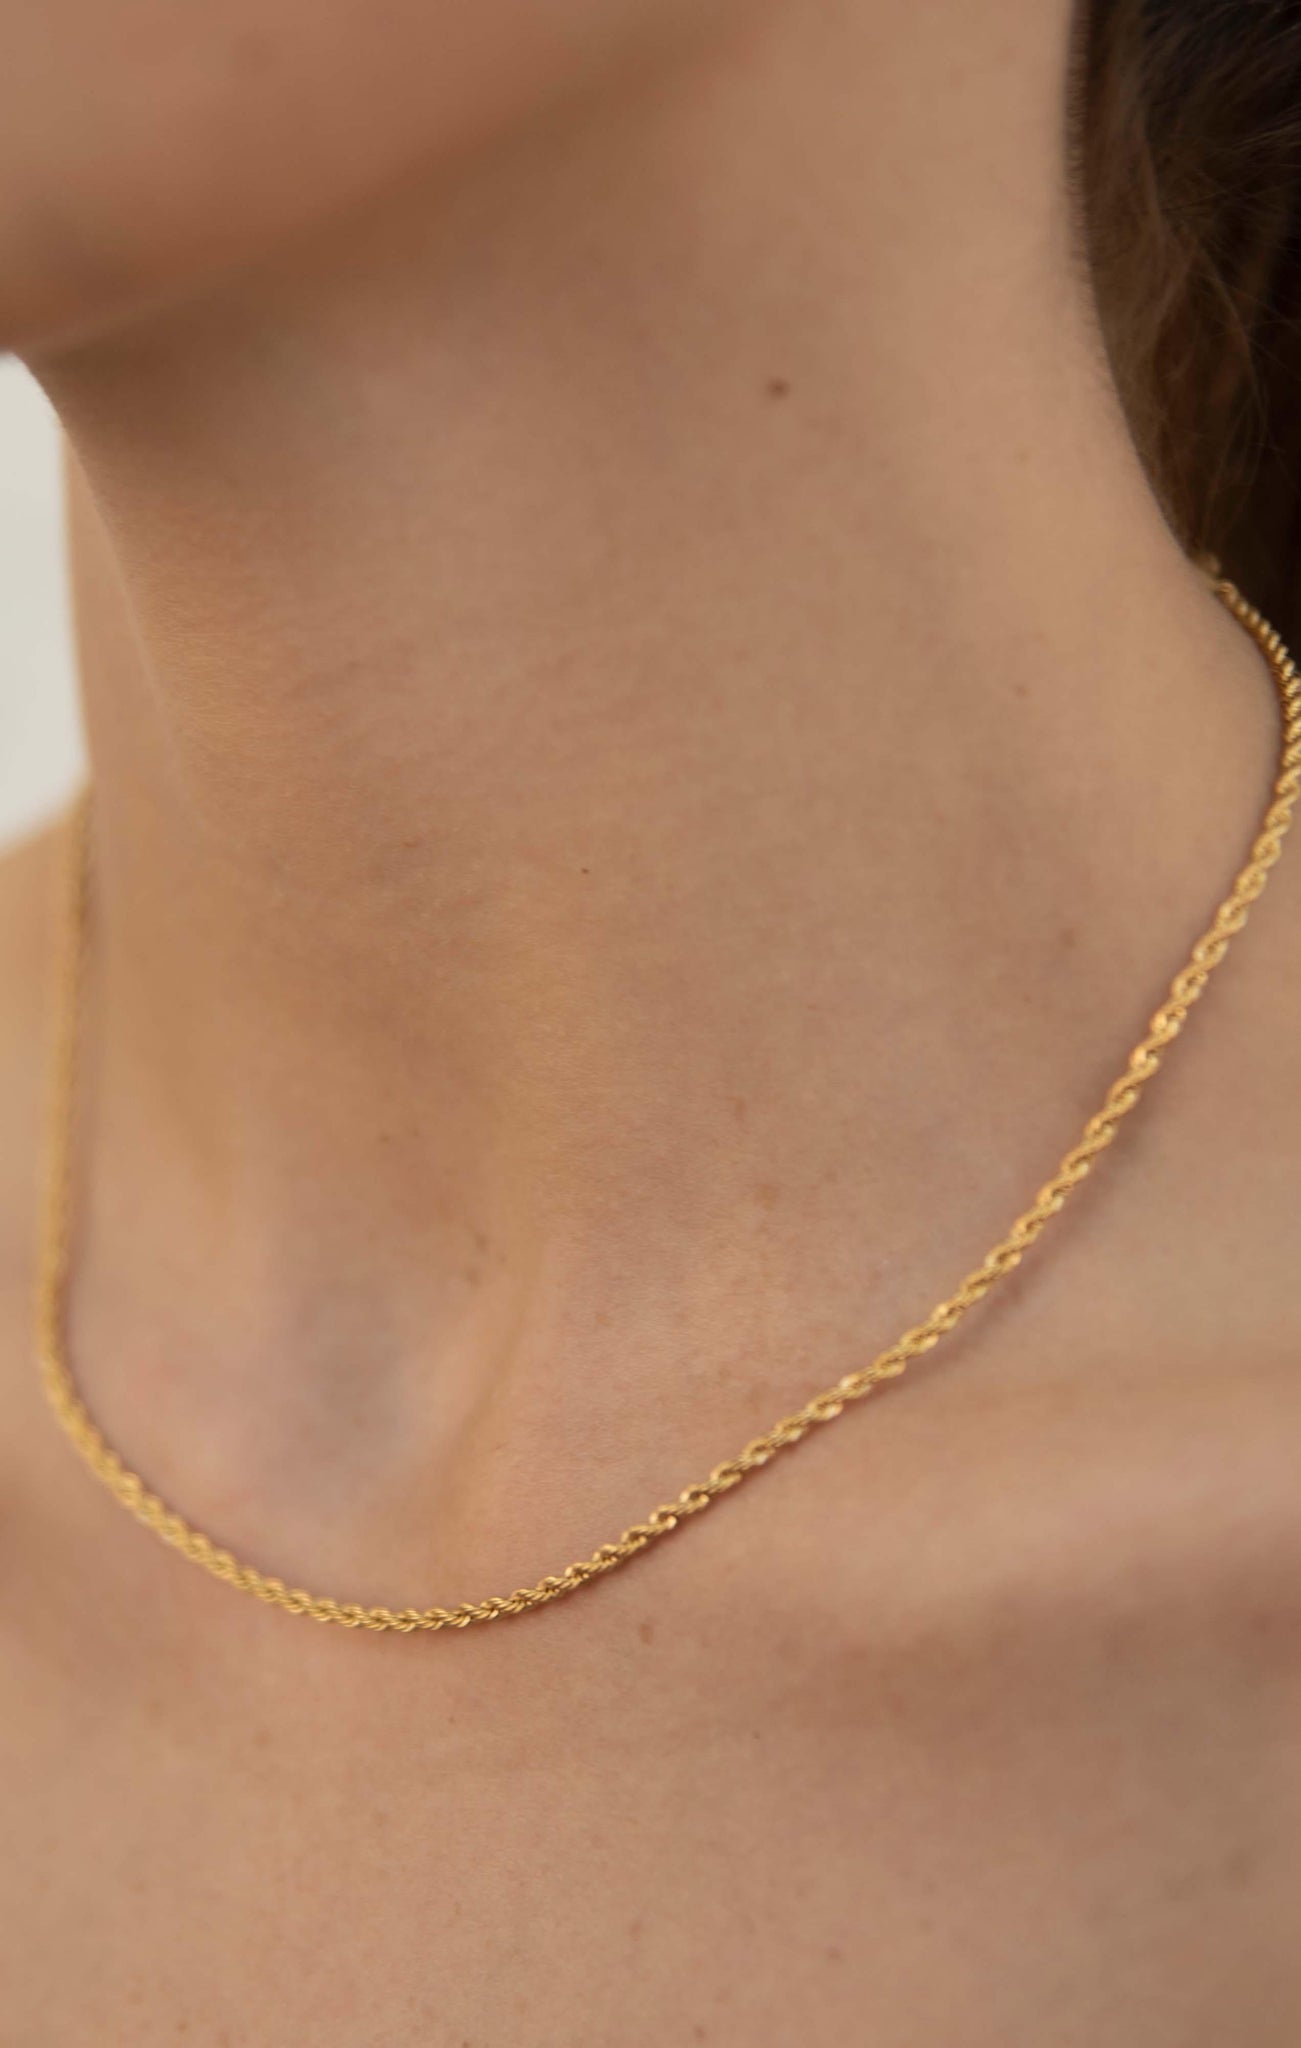 Briella Gold Choker Necklace - Skin and Threads